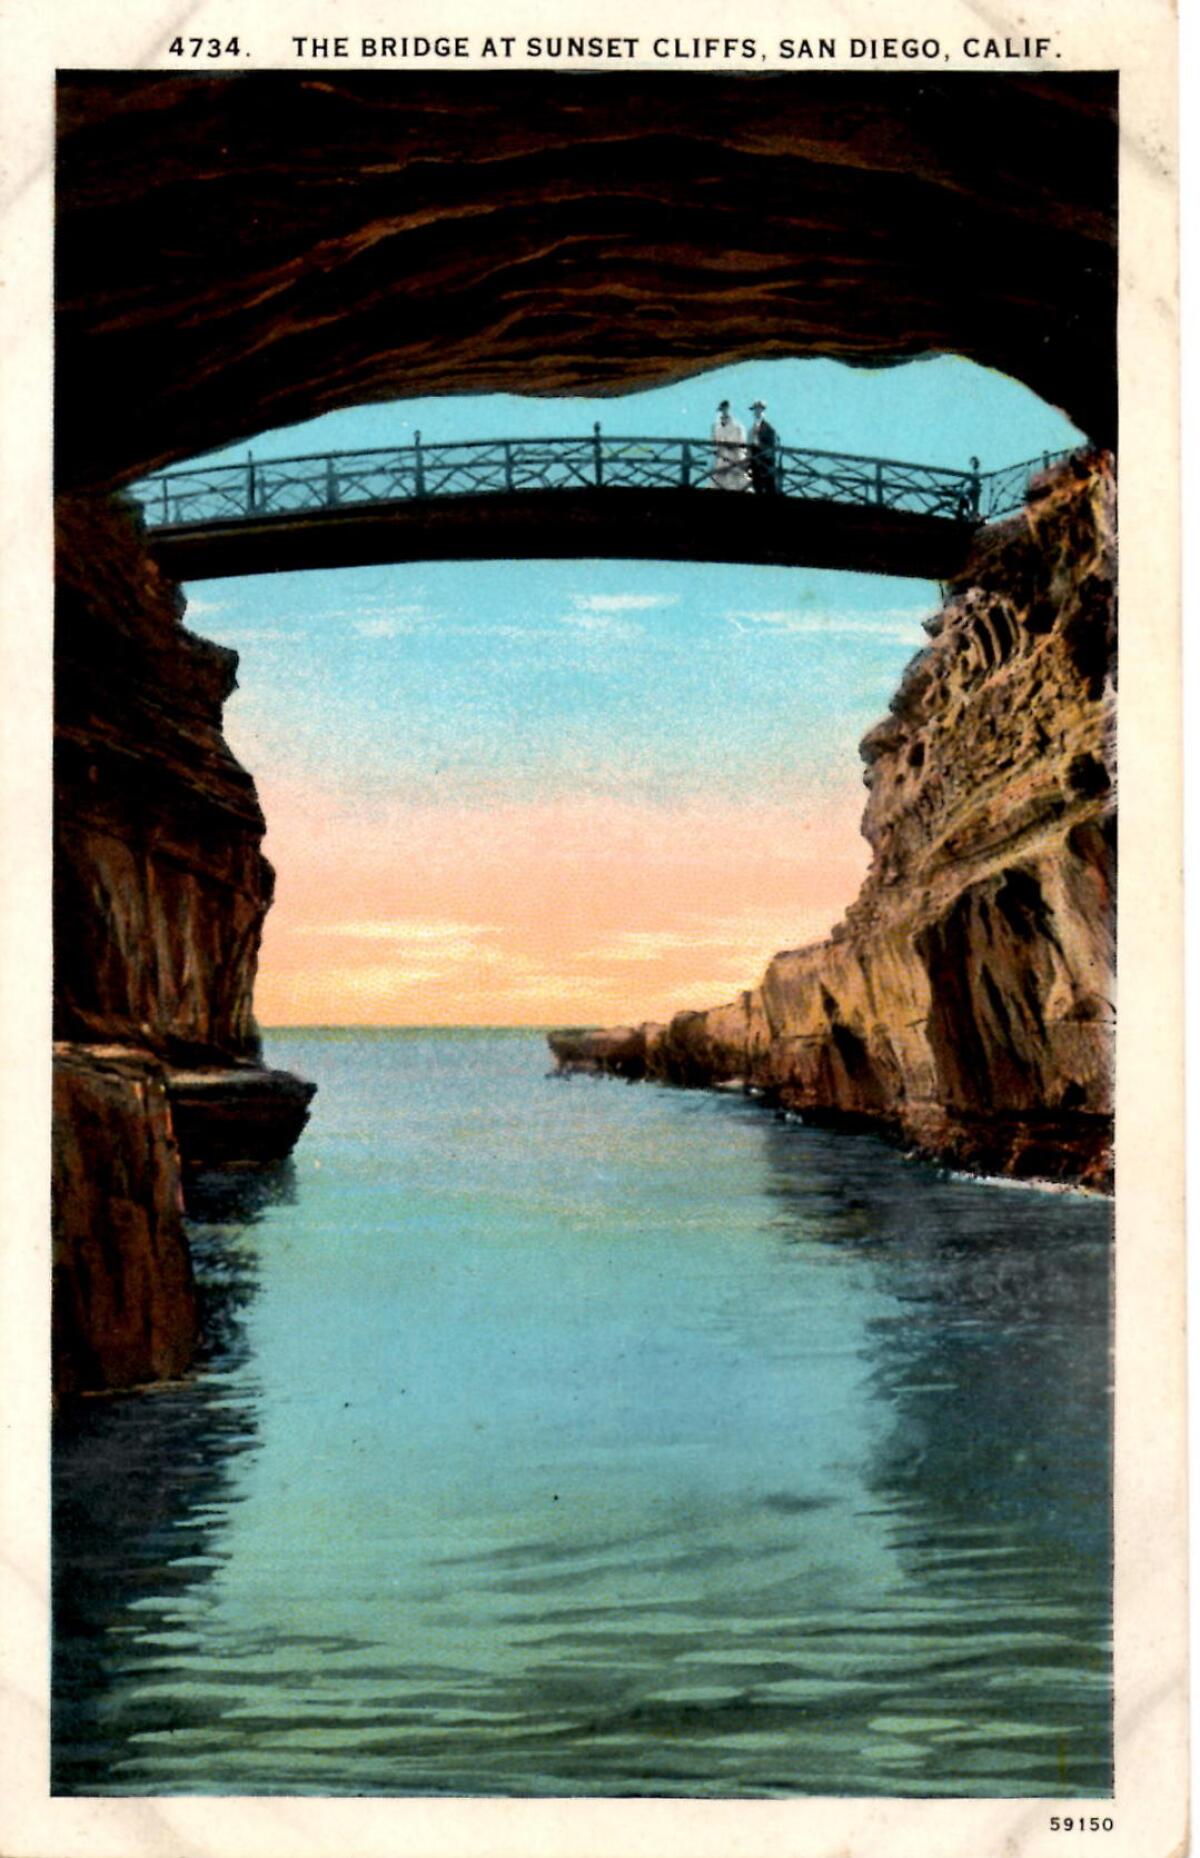 An old postcard shows a bridge that Al Spalding had installed at his Sunset Cliffs Park, which opened in 1915.